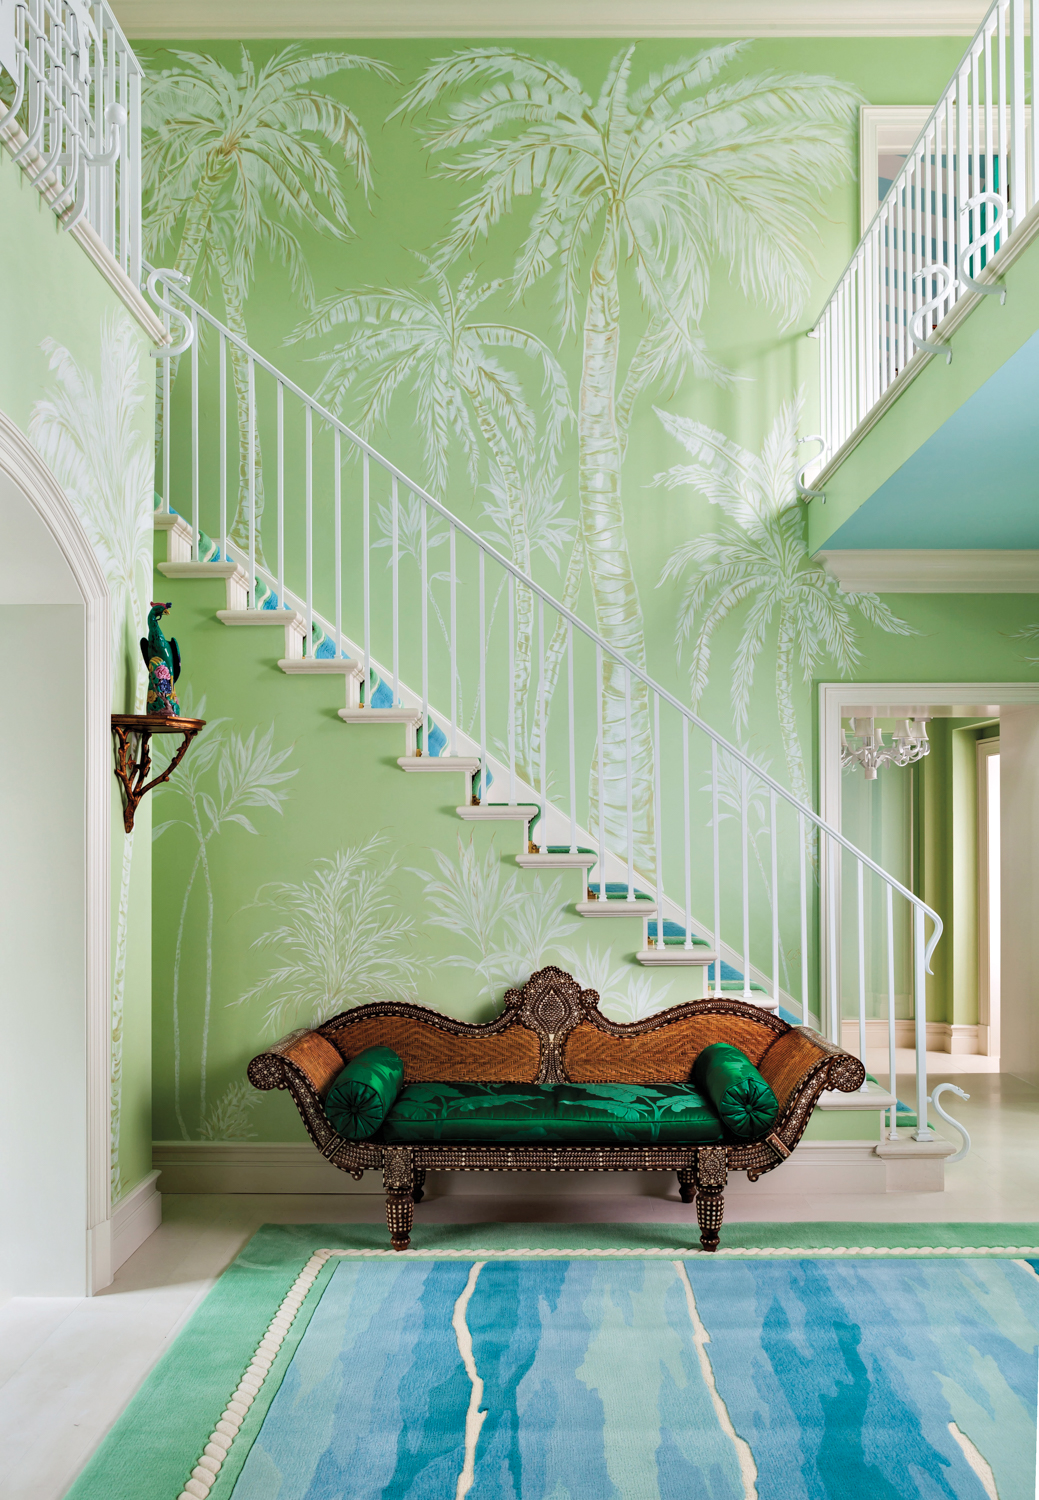 minty green and ocean blue room with palm tree motif mural